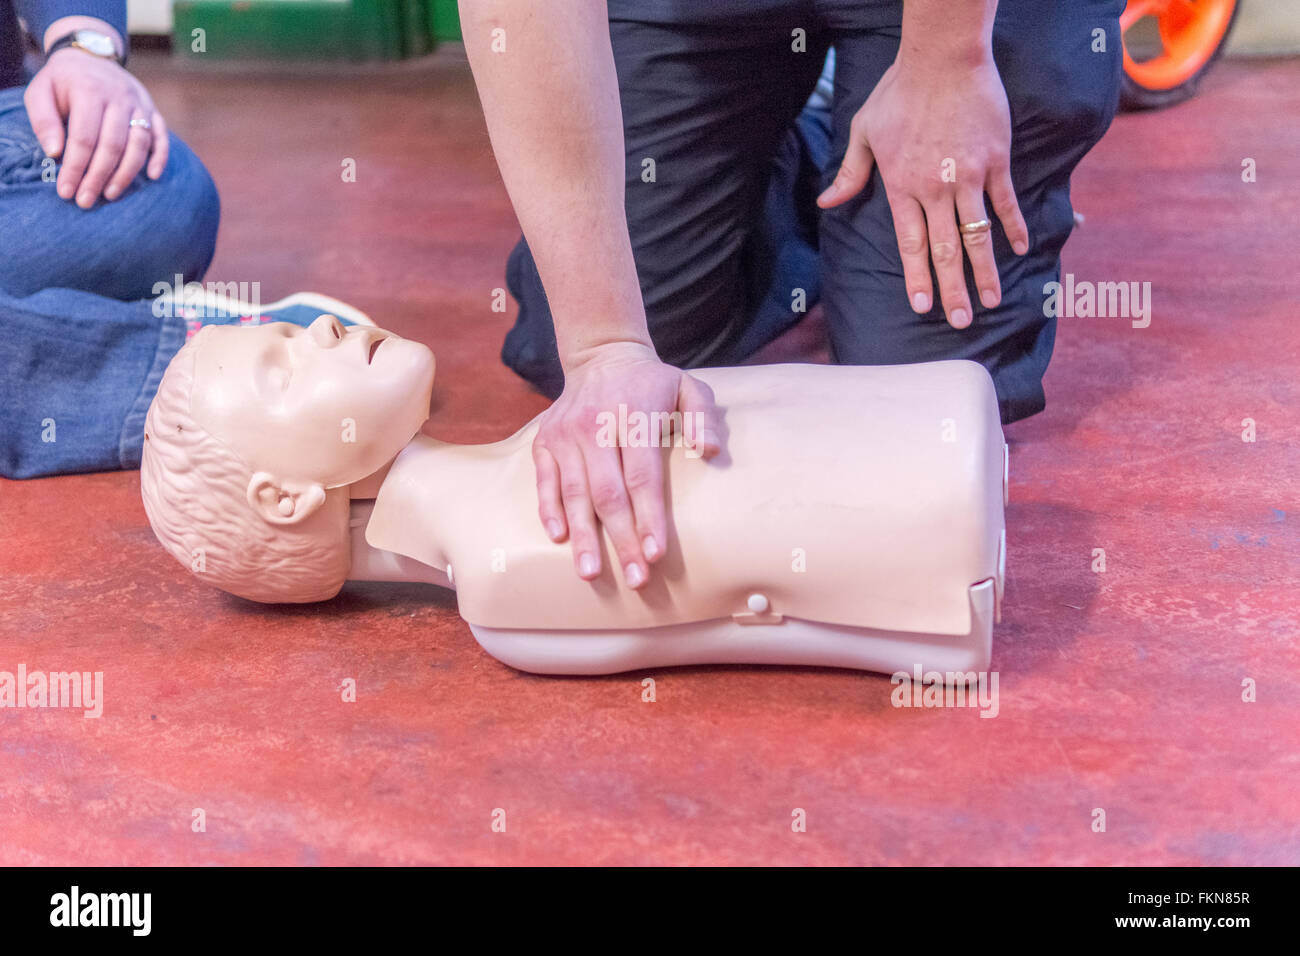 Parents and grandparents are given Basic Life Support (BLS) instruction PICTURED: position of heel of hand on chest prior to chest compressions. Stock Photo